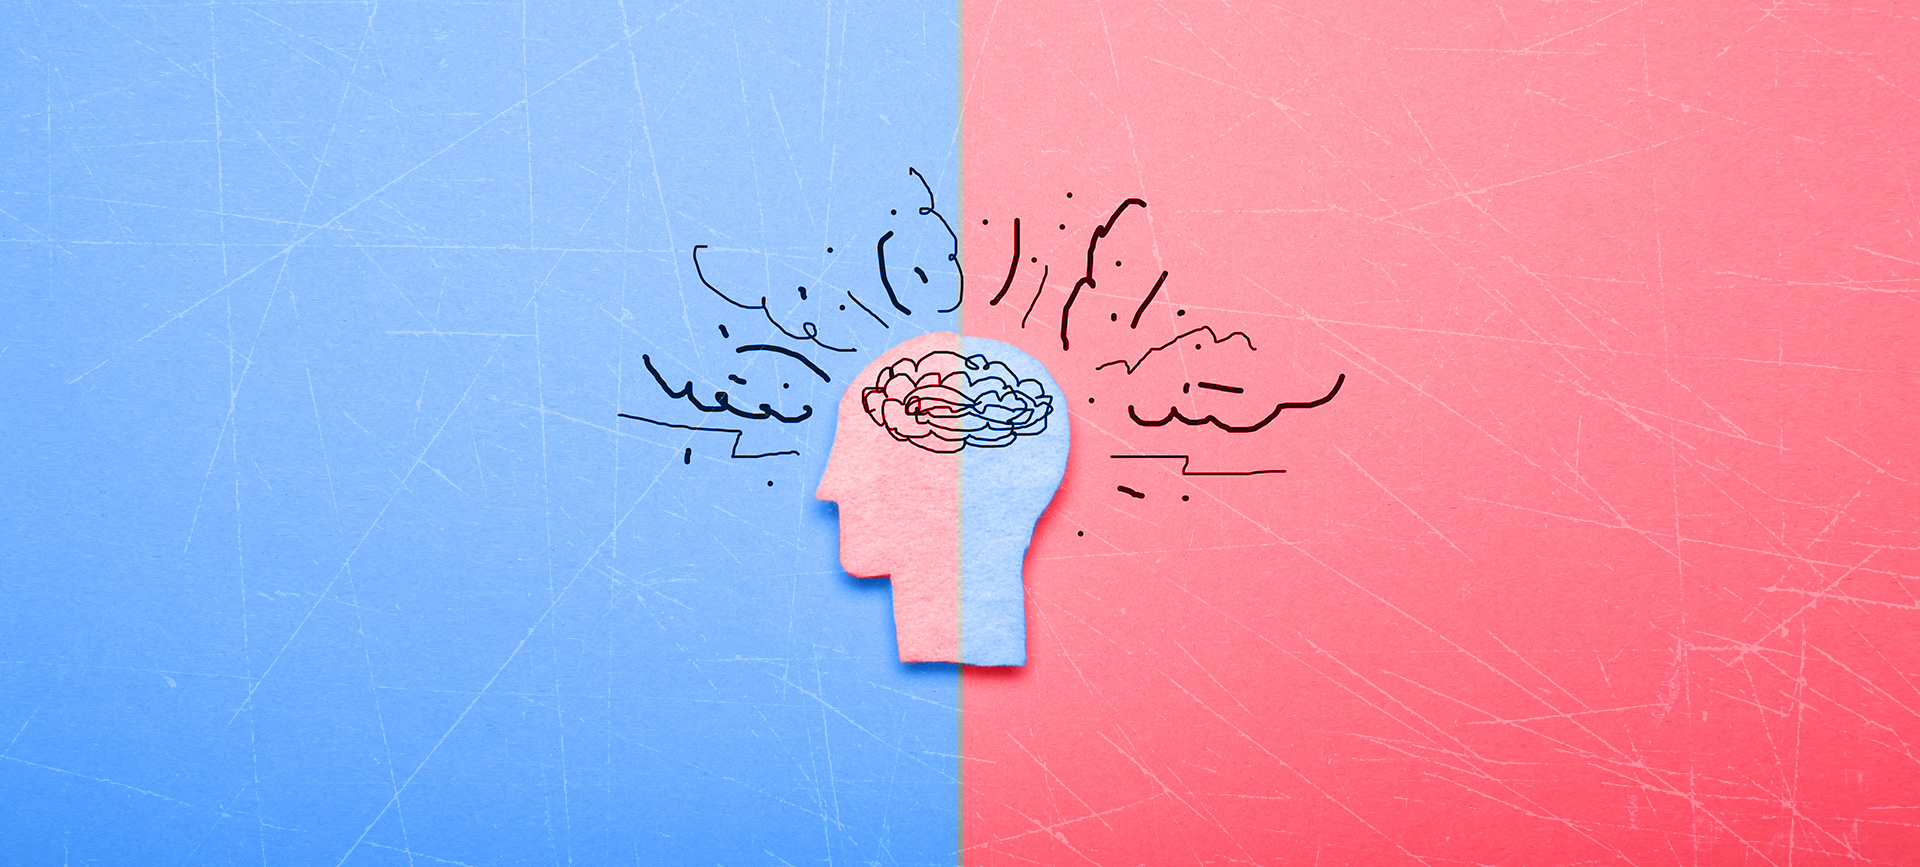 A cutout of a human head with black lines coming from it is against a red and blue background.